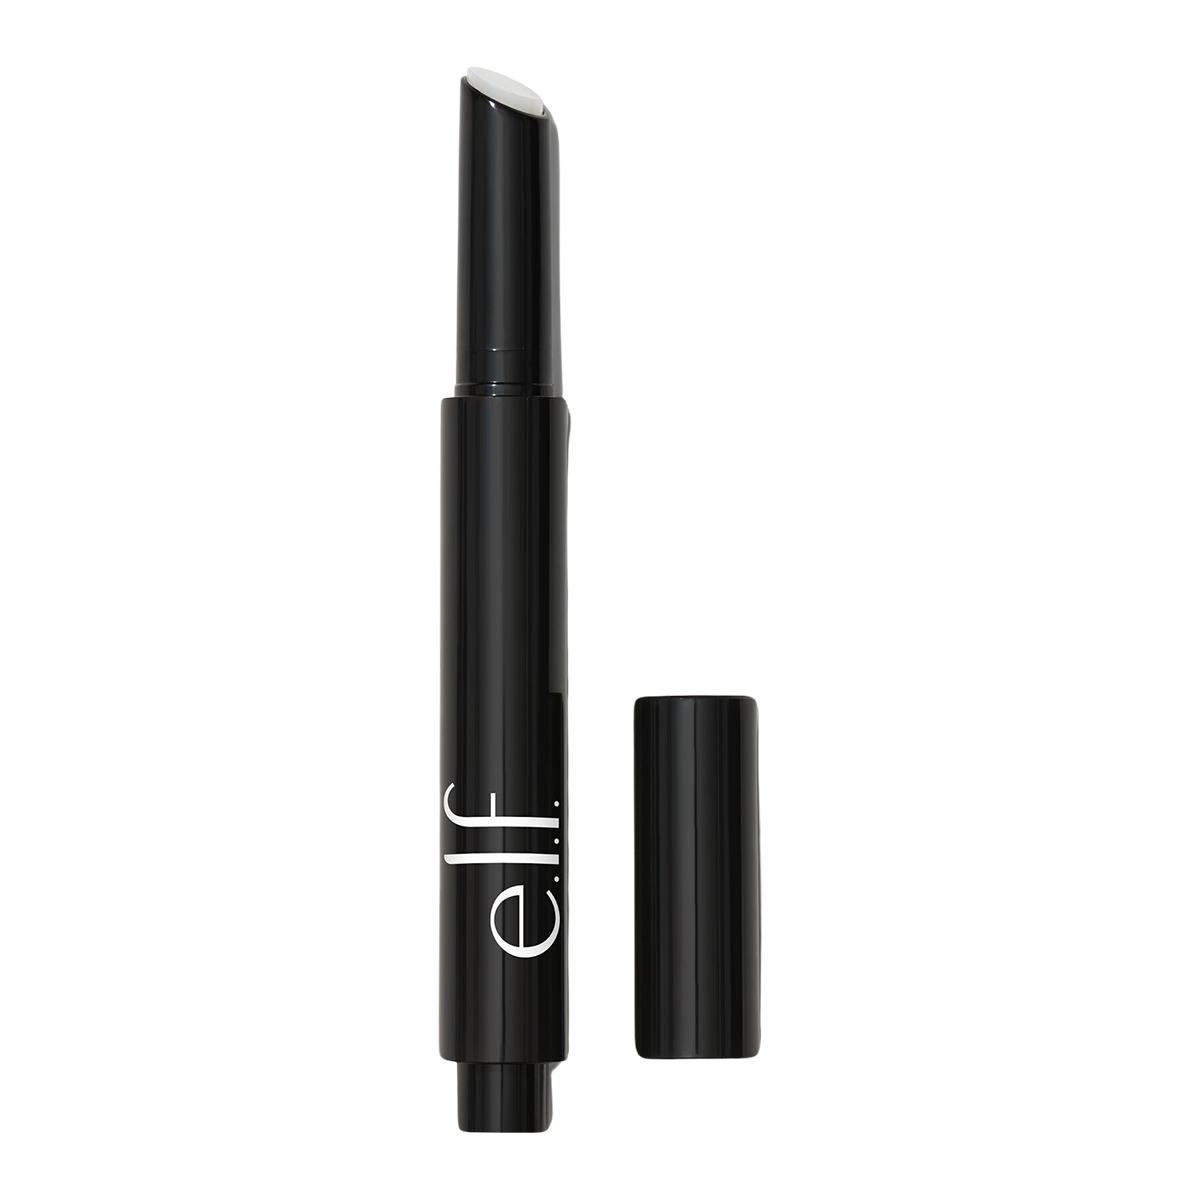 e.l.f. Pout Clout Lip Plumping Pen | In The Clear